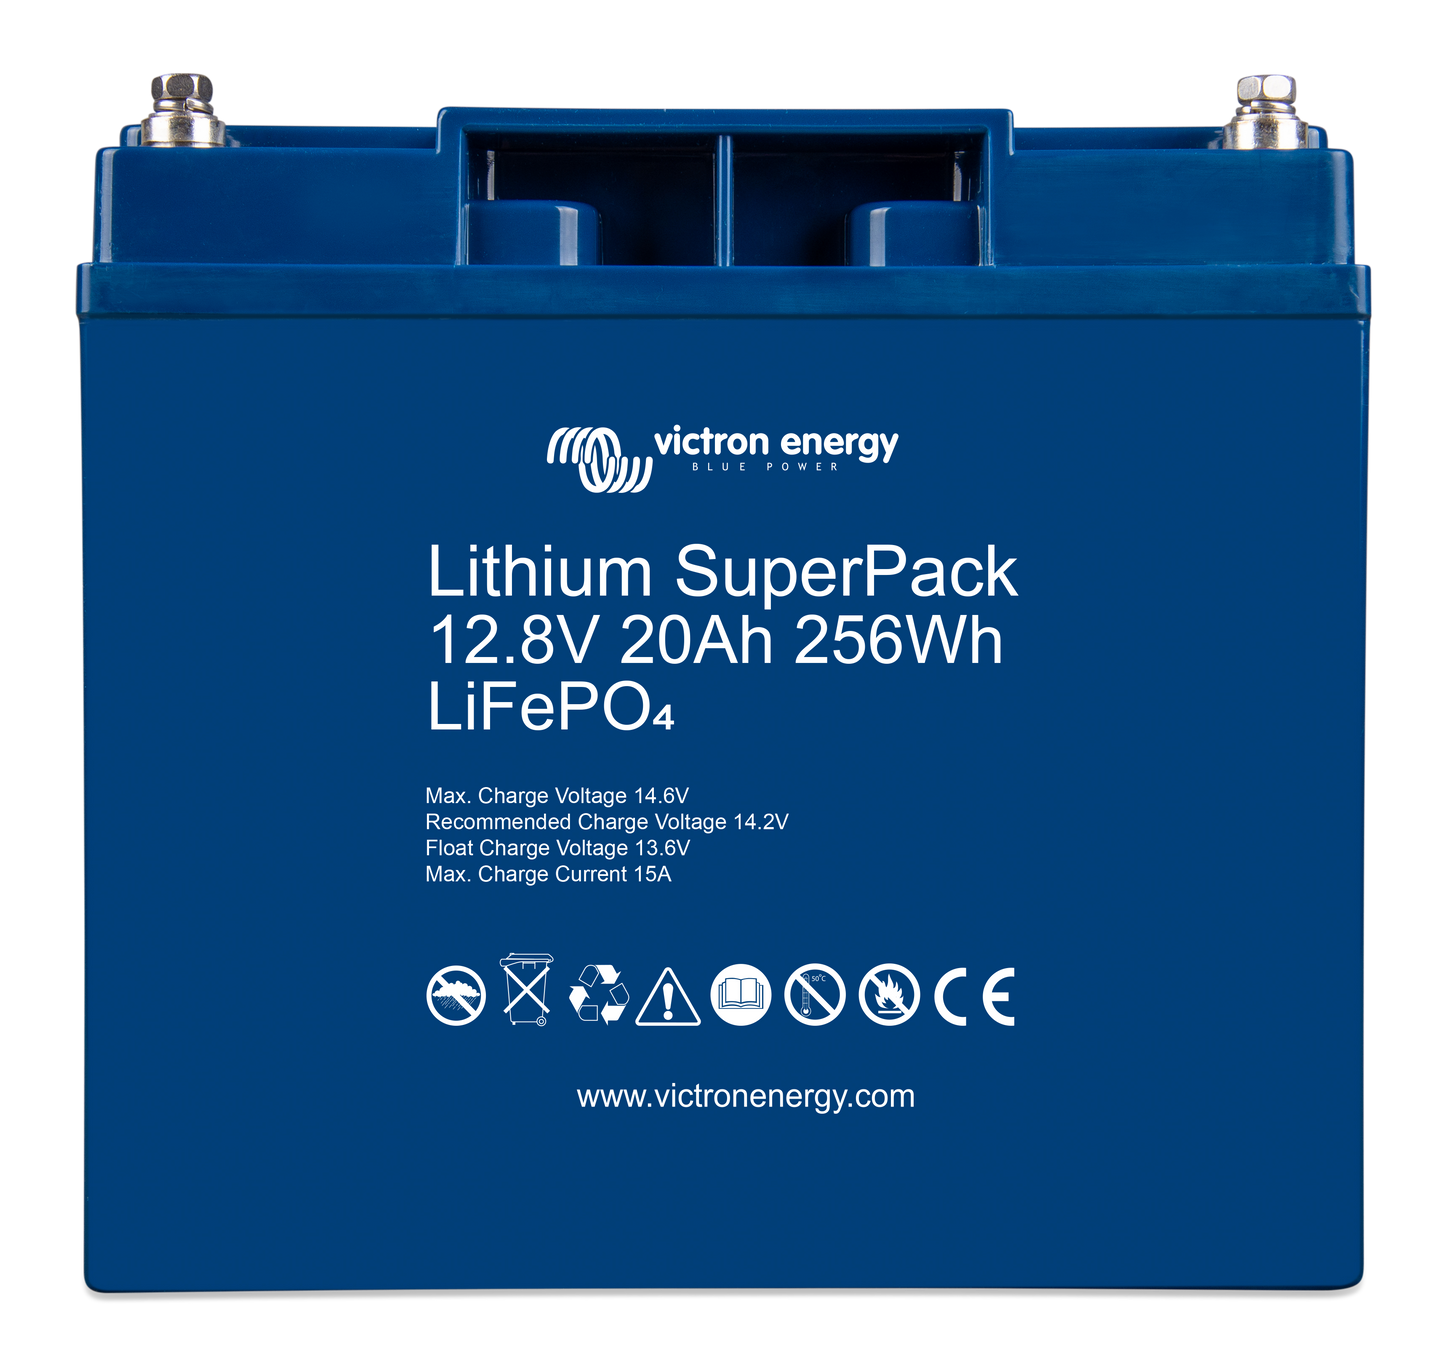 Lithium SuperPack Battery